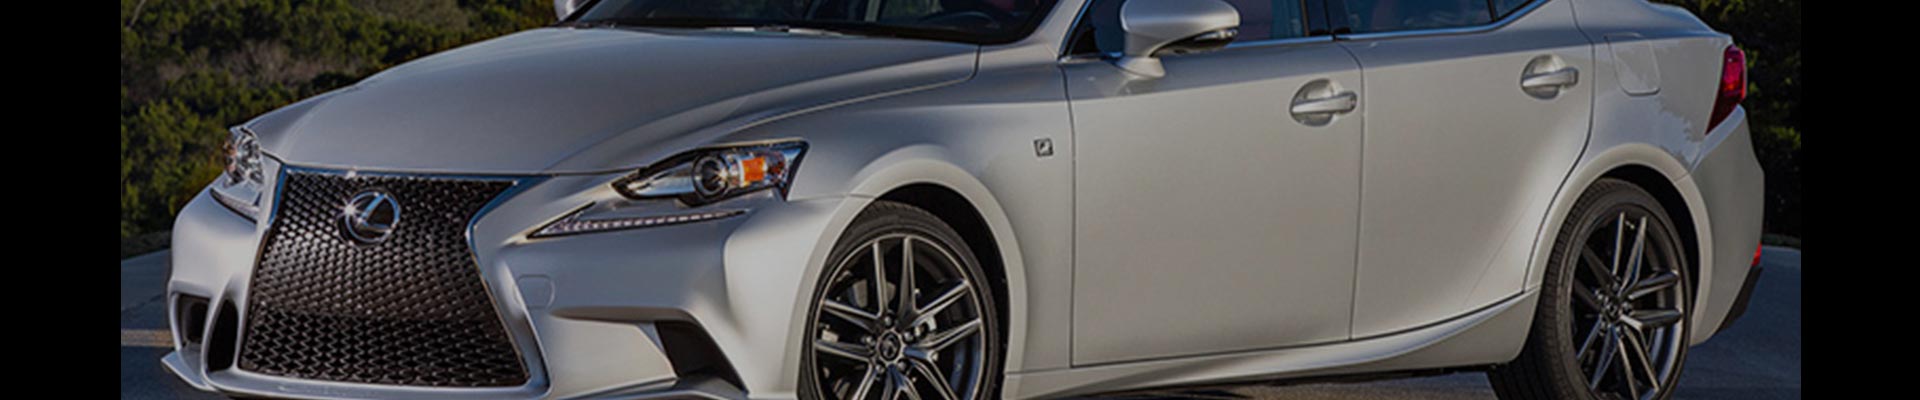 Shop Replacement and OEM 2013 Lexus IS350 Parts with Discounted Price on the Net